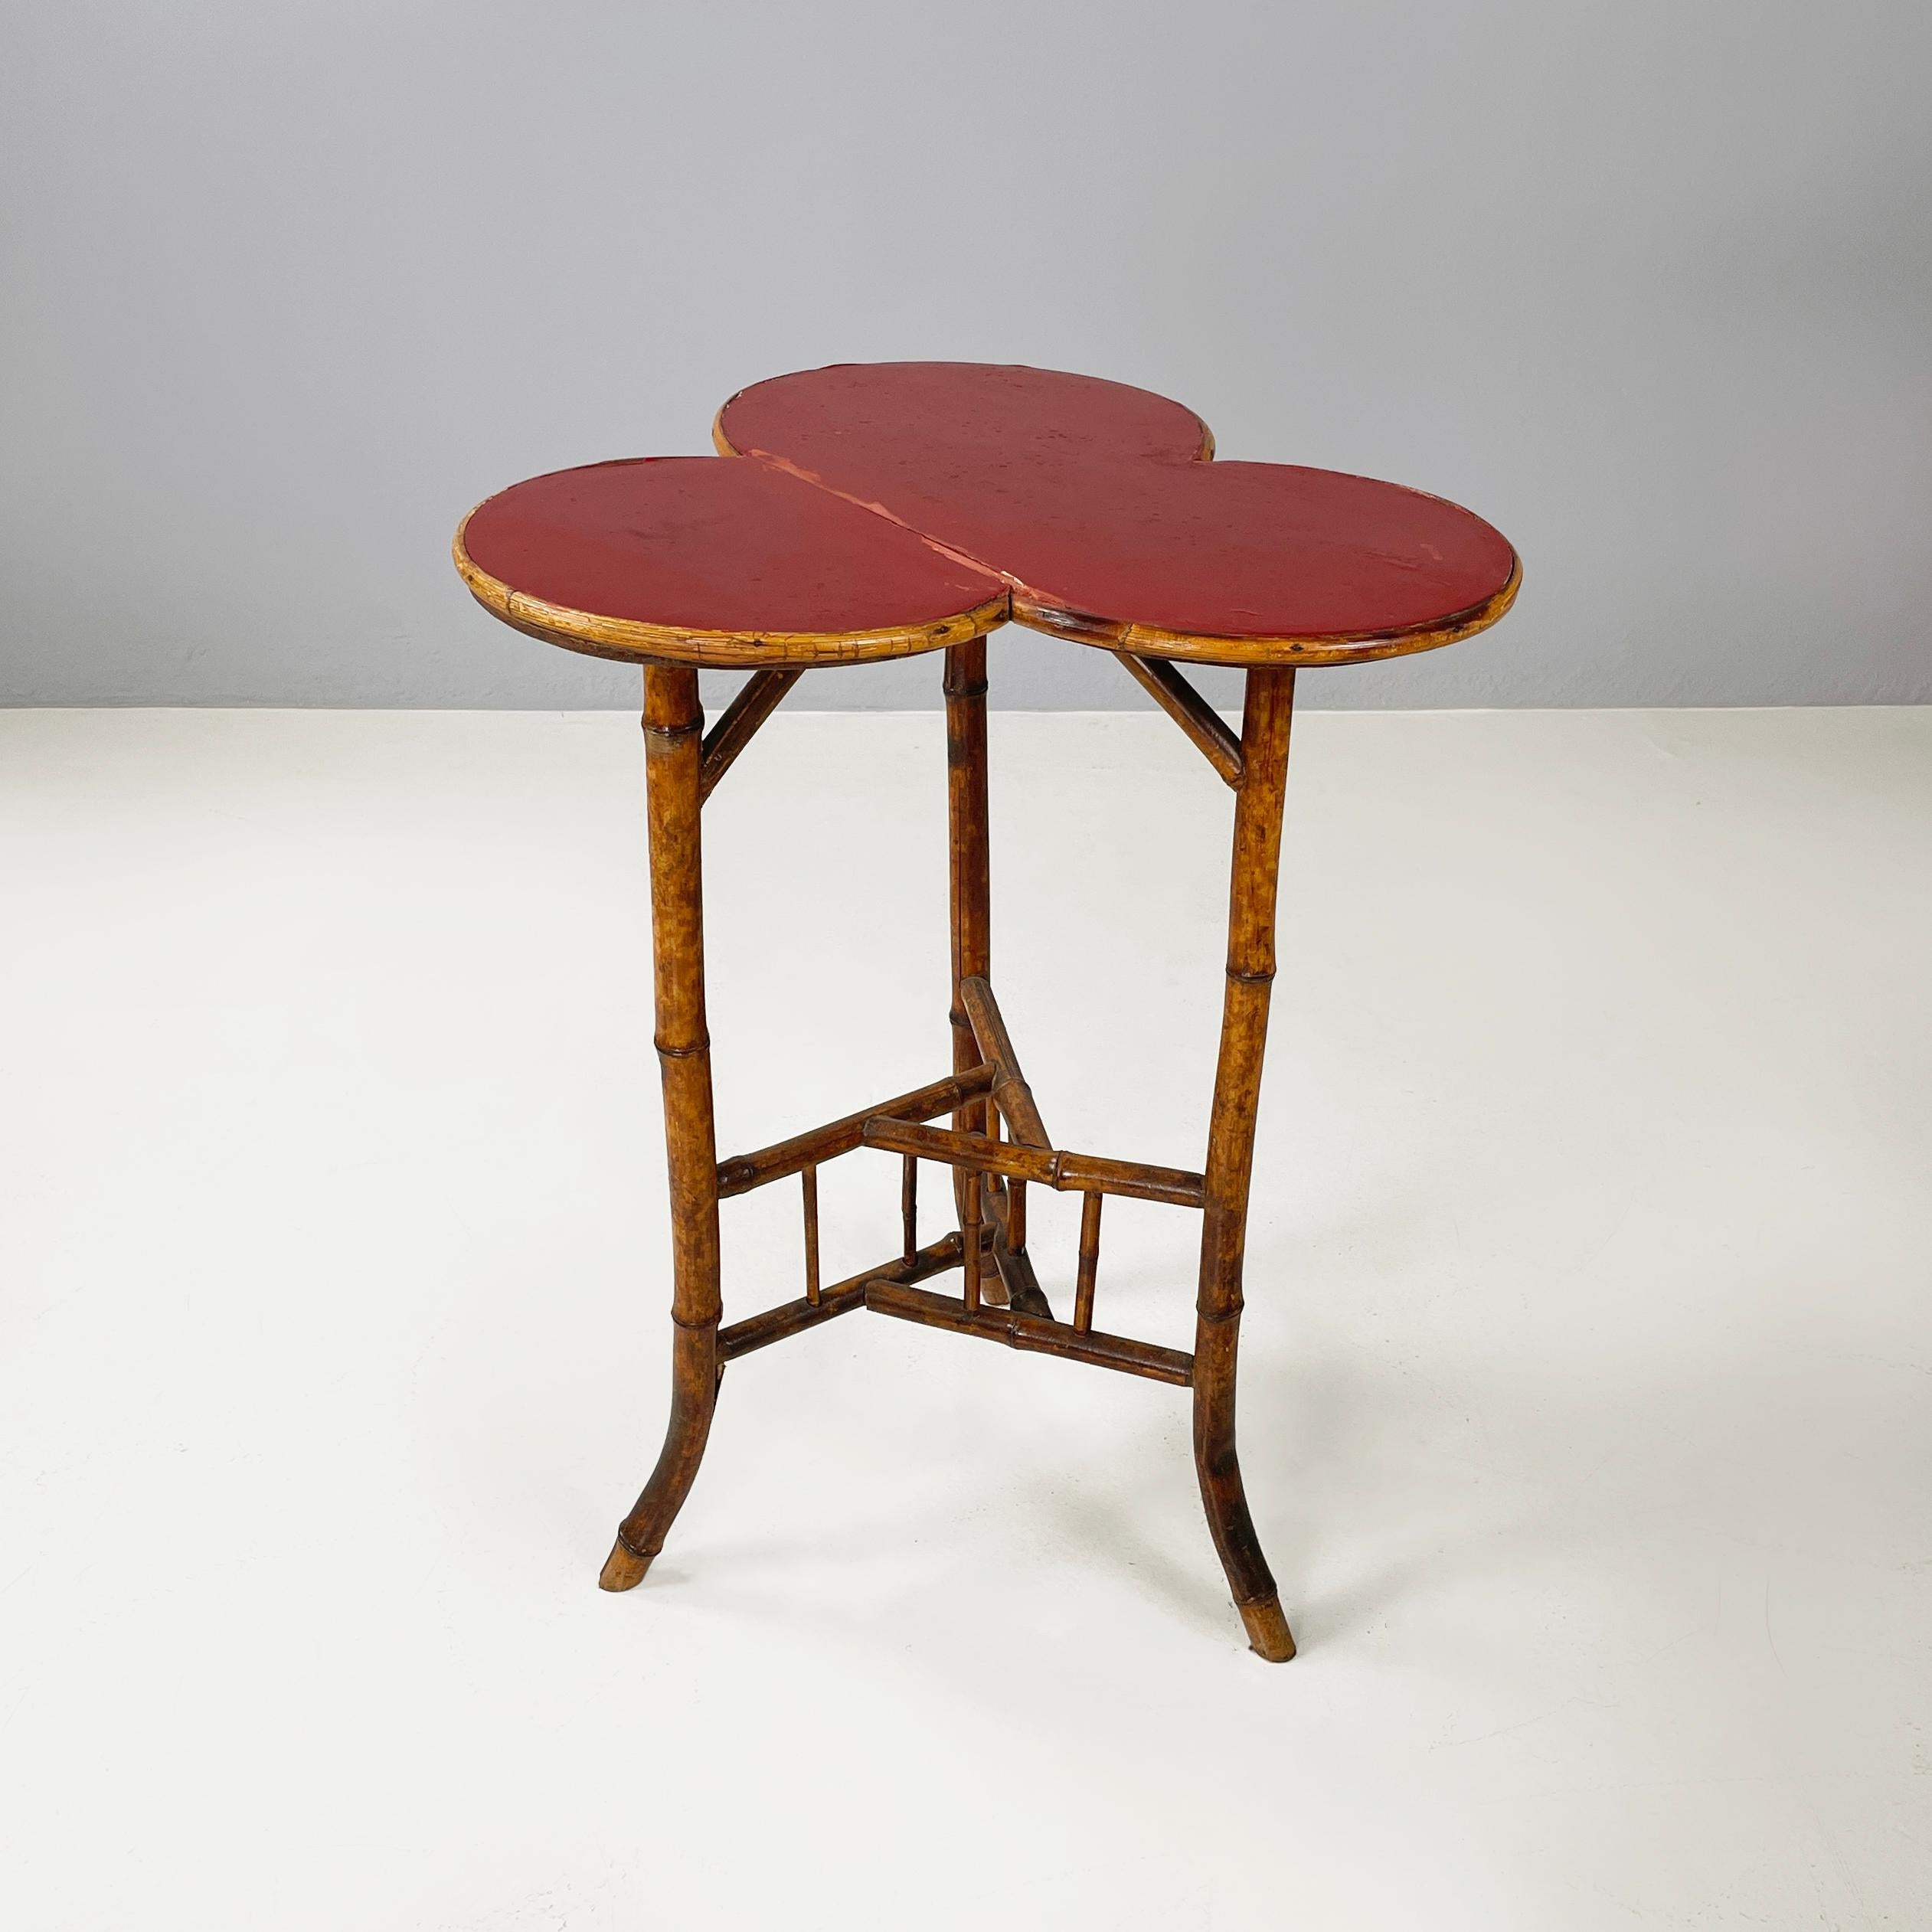 Italian art deco Coffee table with red wood clover top and bamboo, 1900-1950s
Coffee table with clover-shaped top in dark red painted wood with wooden profile. The three bamboo legs have a triangular structure in the center, also made of bamboo.